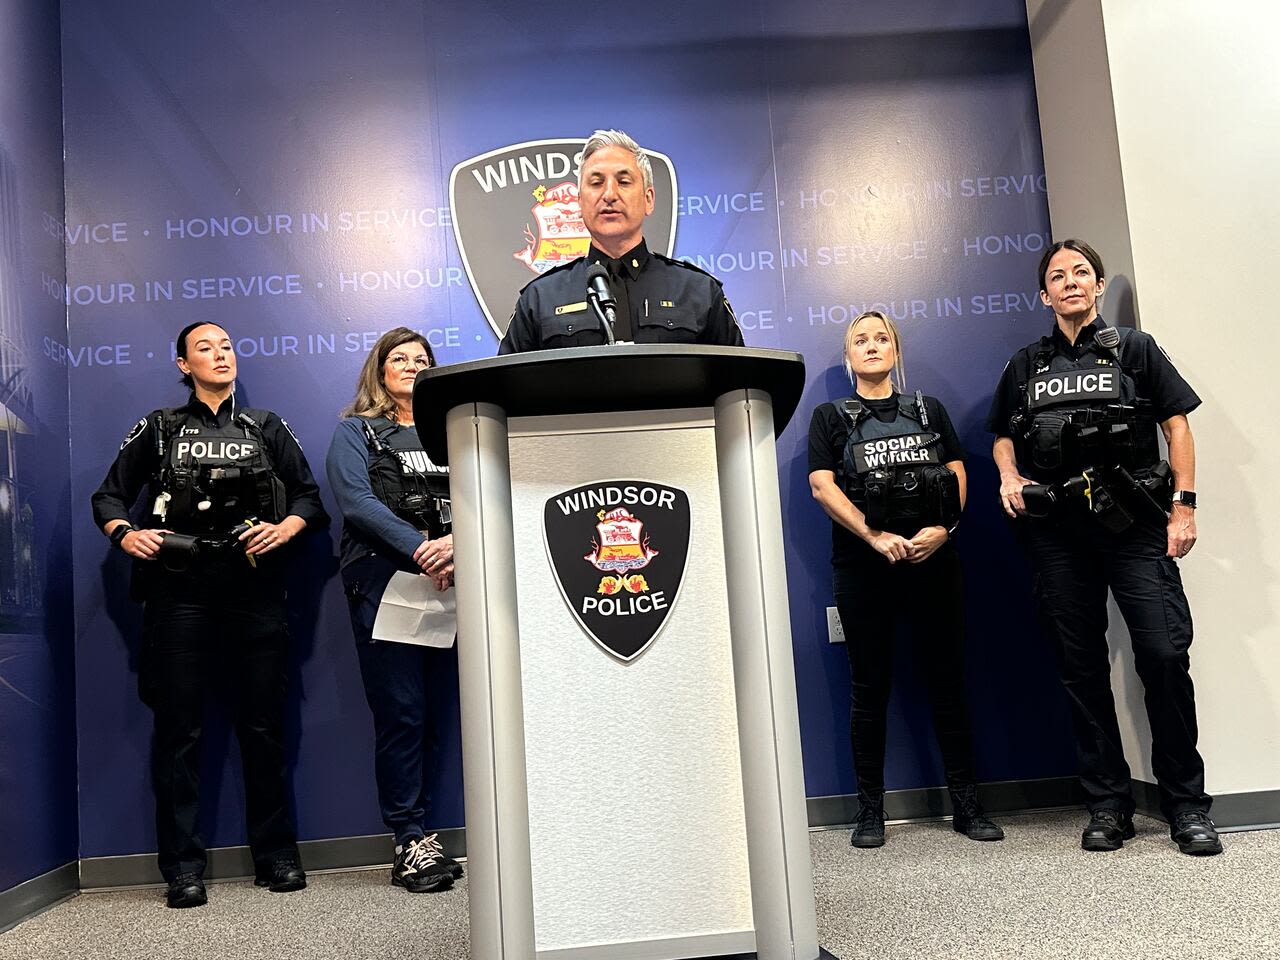 Nurse-police teams expanded as part of downtown Windsor revitalization